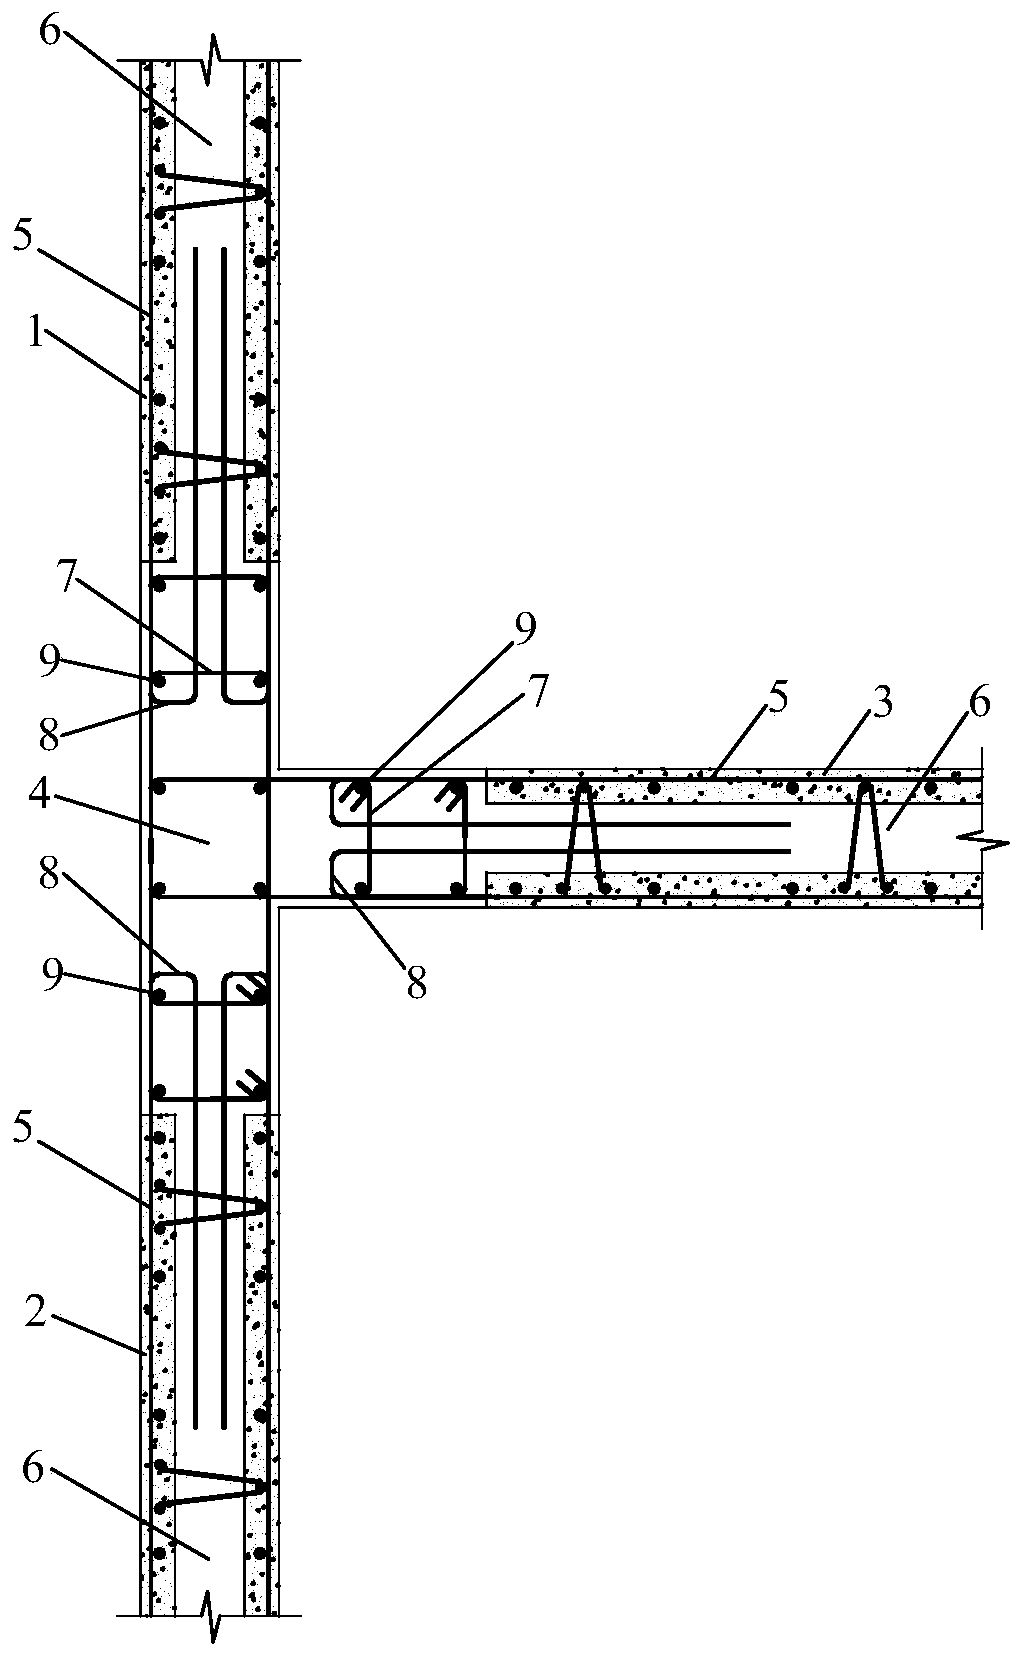 Connection structure of T-shaped superimposed shear wall edge member